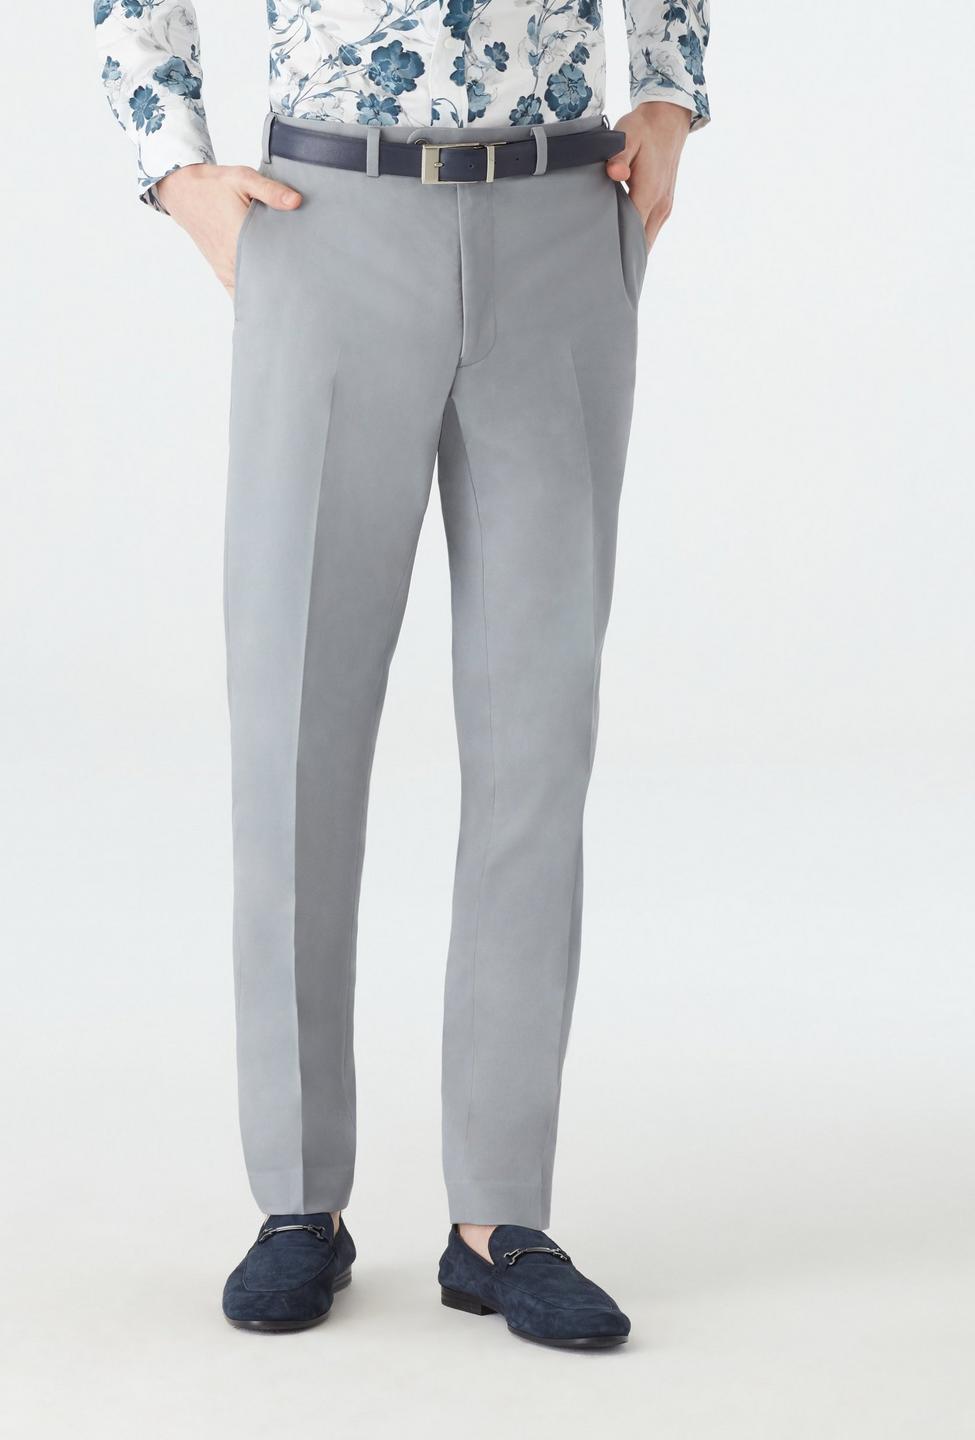 Hartley Cotton Stretch Dove Gray Pants